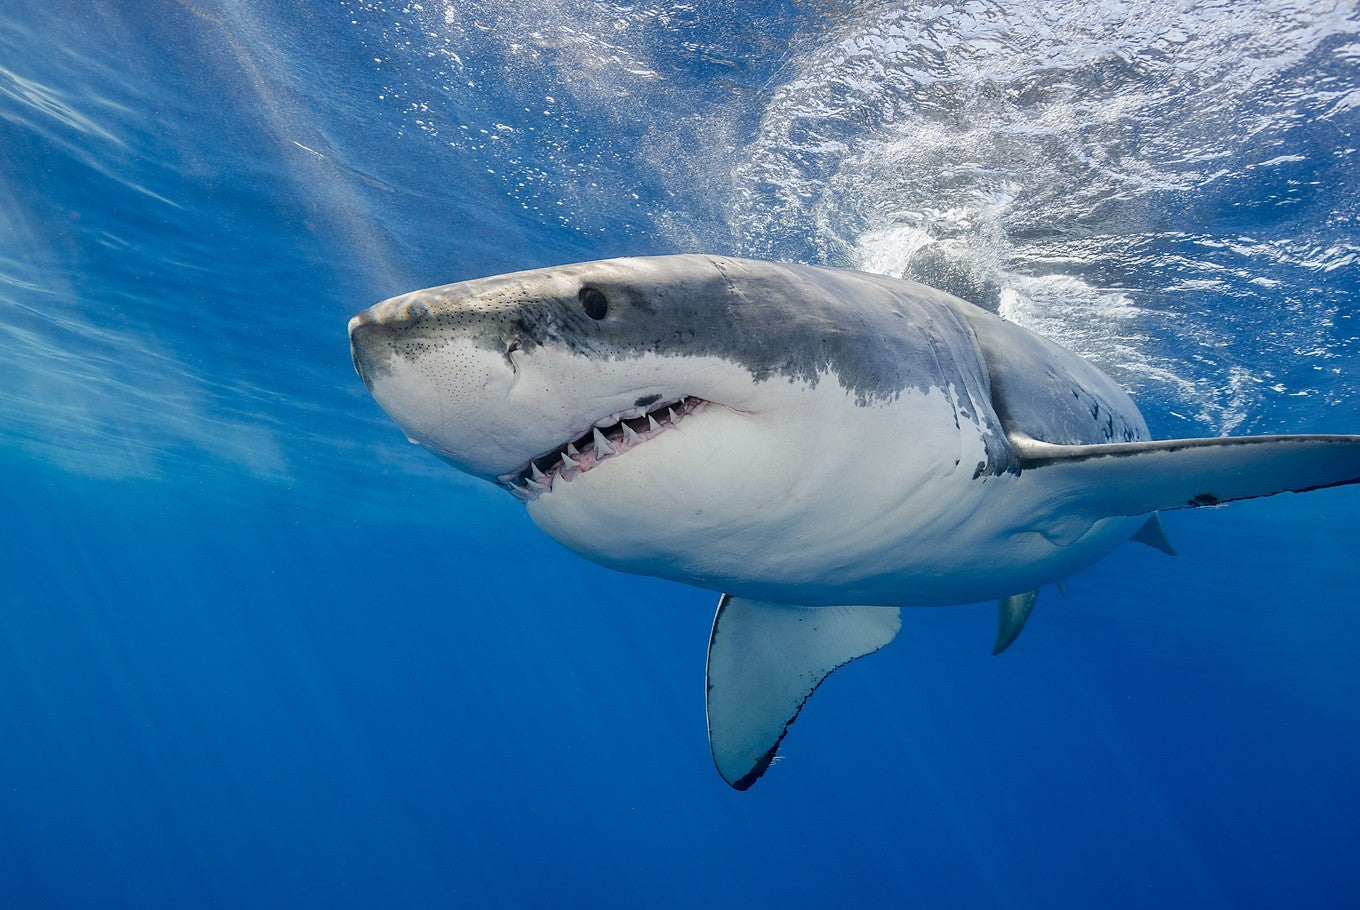 Facts about white sharks